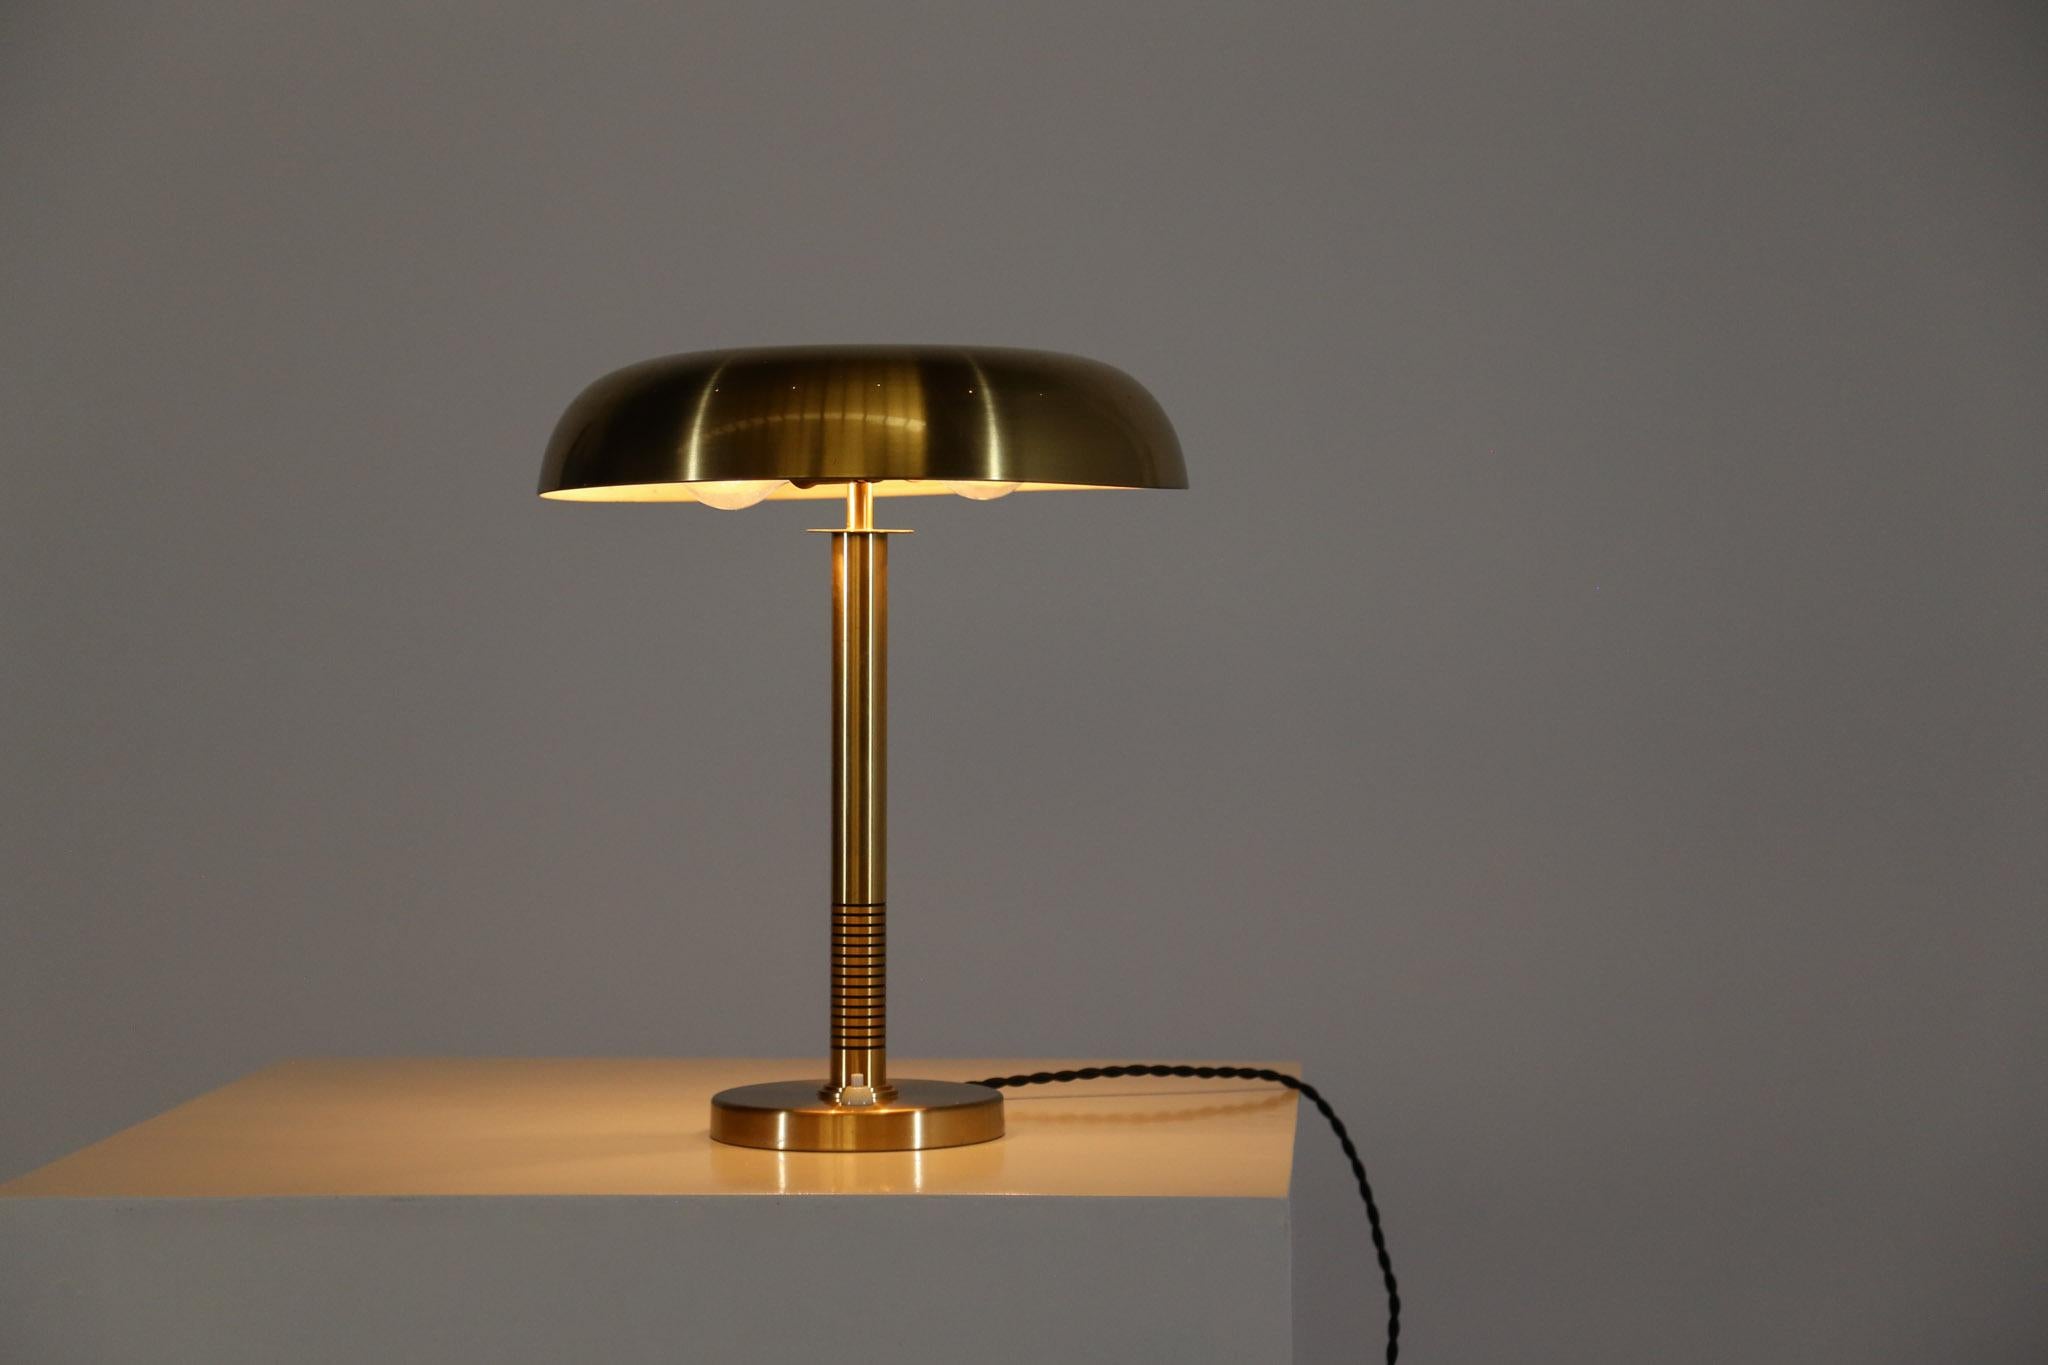 Rare table lamp designed by Bertil Brisborg, 1956
Perforated shade in the style of Paavo Tynell.
E27 bulb, freshly re-wired
Excellent condition.